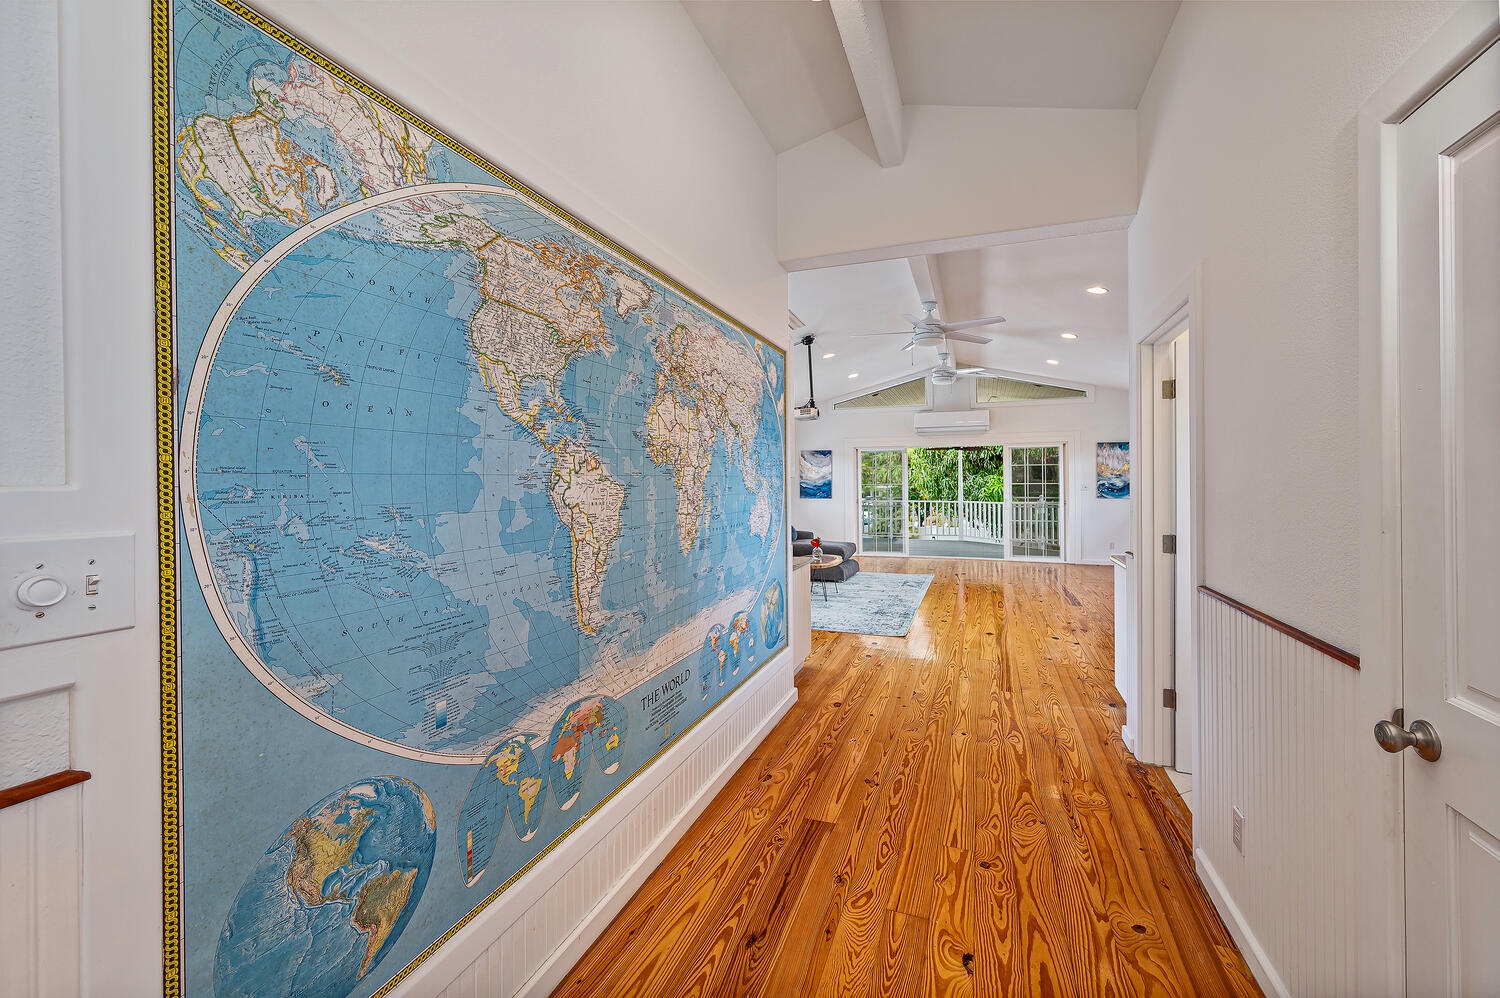 Kailua Vacation Rentals, Villa Hui Hou - From one world to the next as you enter into the media room!